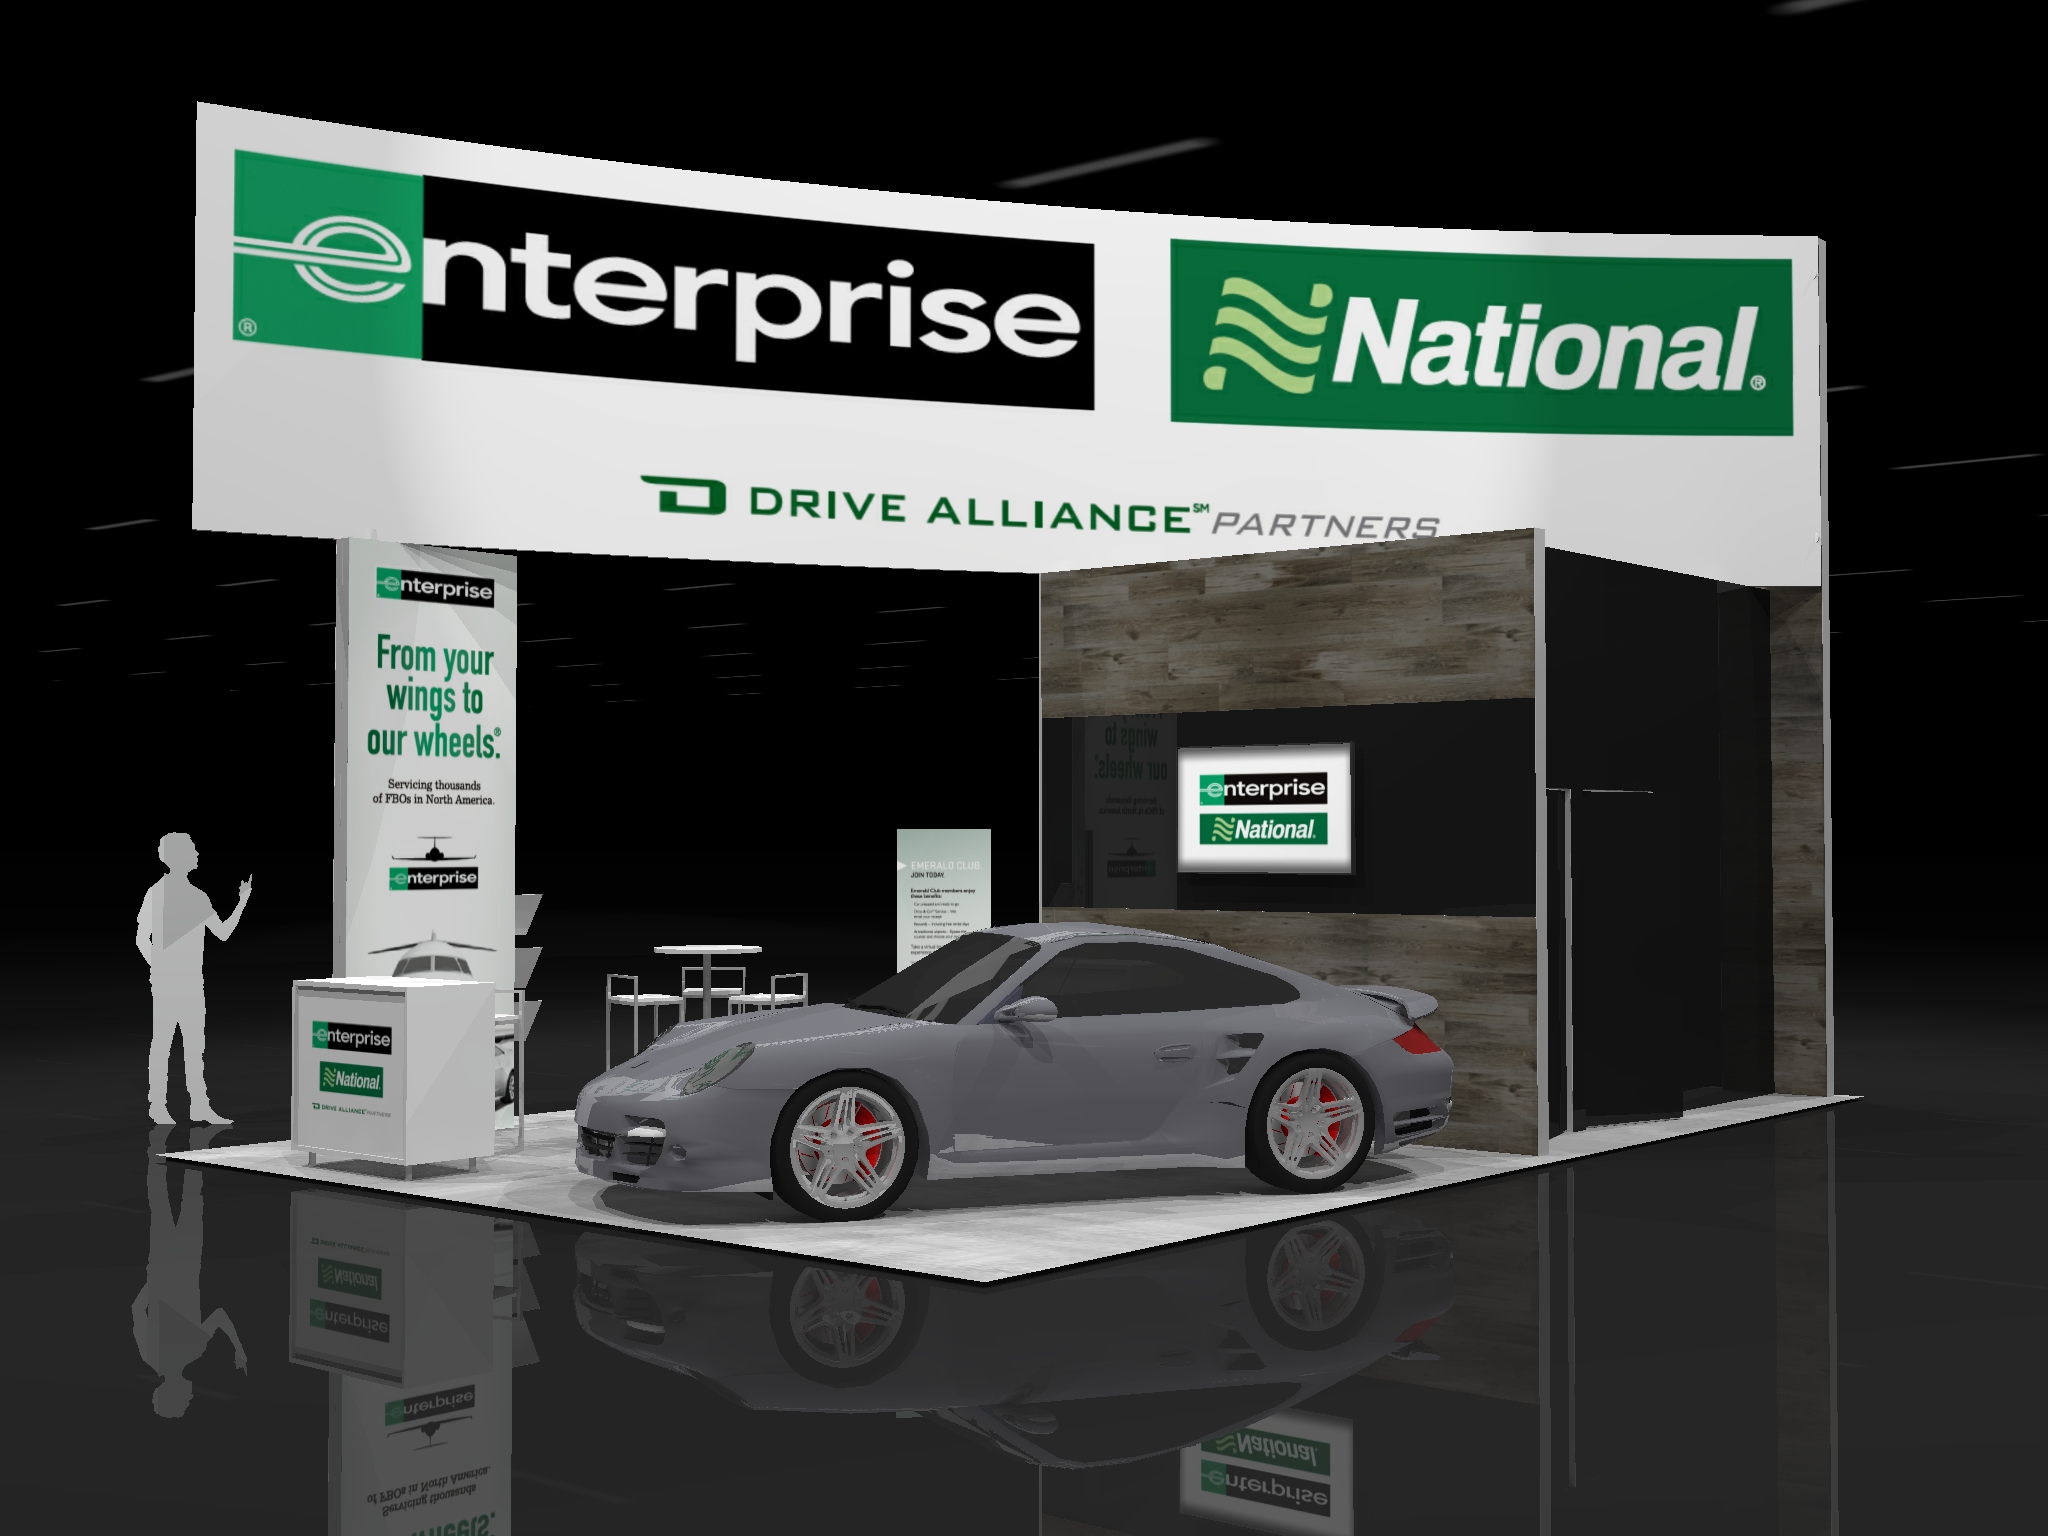 ENTP028 - 20x30 Trade Show Booth Rental